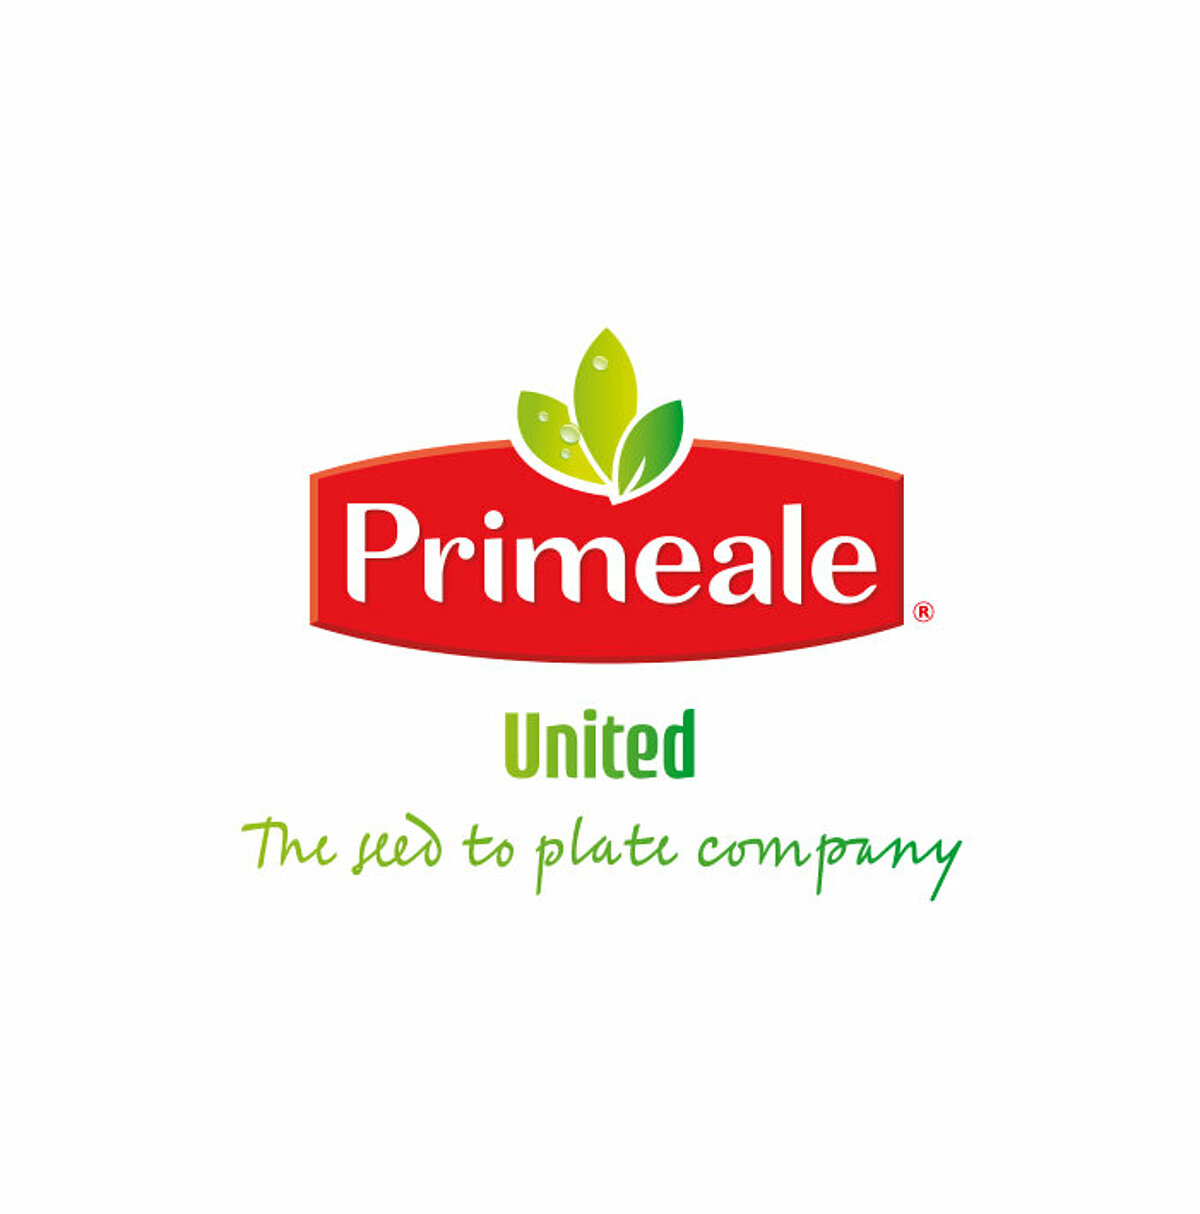 A healthy work environment at Primeale United